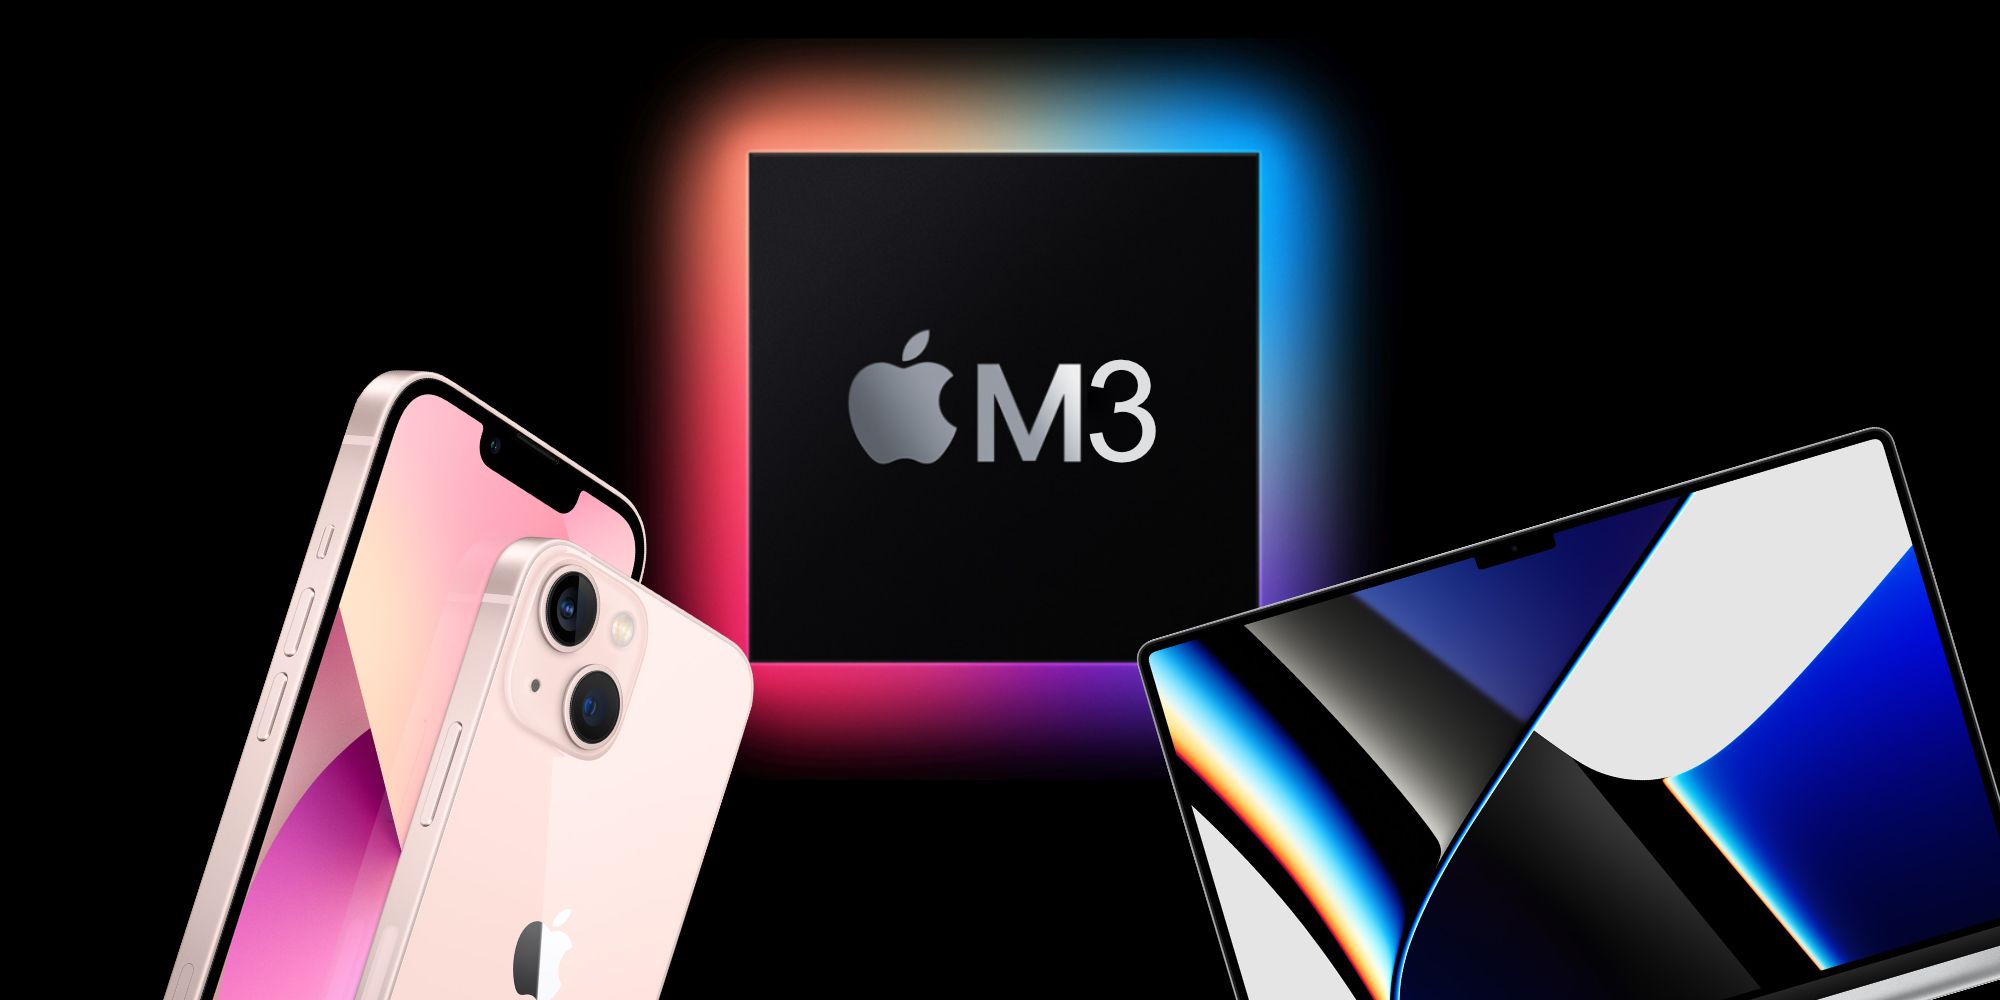 iPhones & Macs Expected To Get Hugely Improved 3nm Chips In 2023